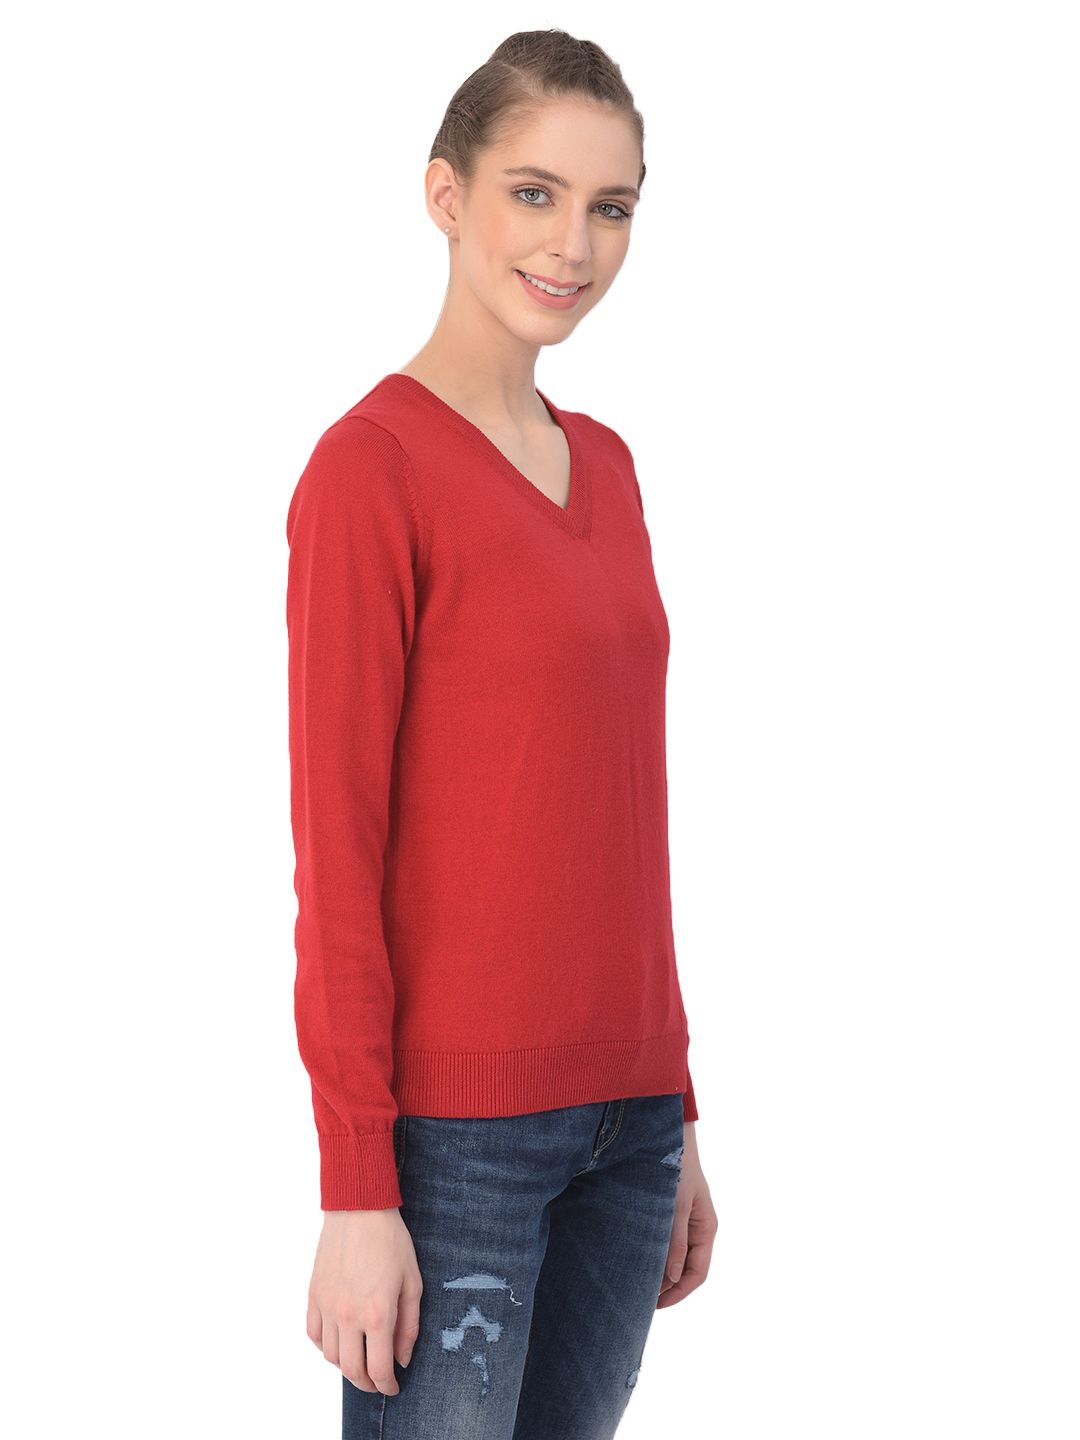 Tango Red v neck pullover sweater